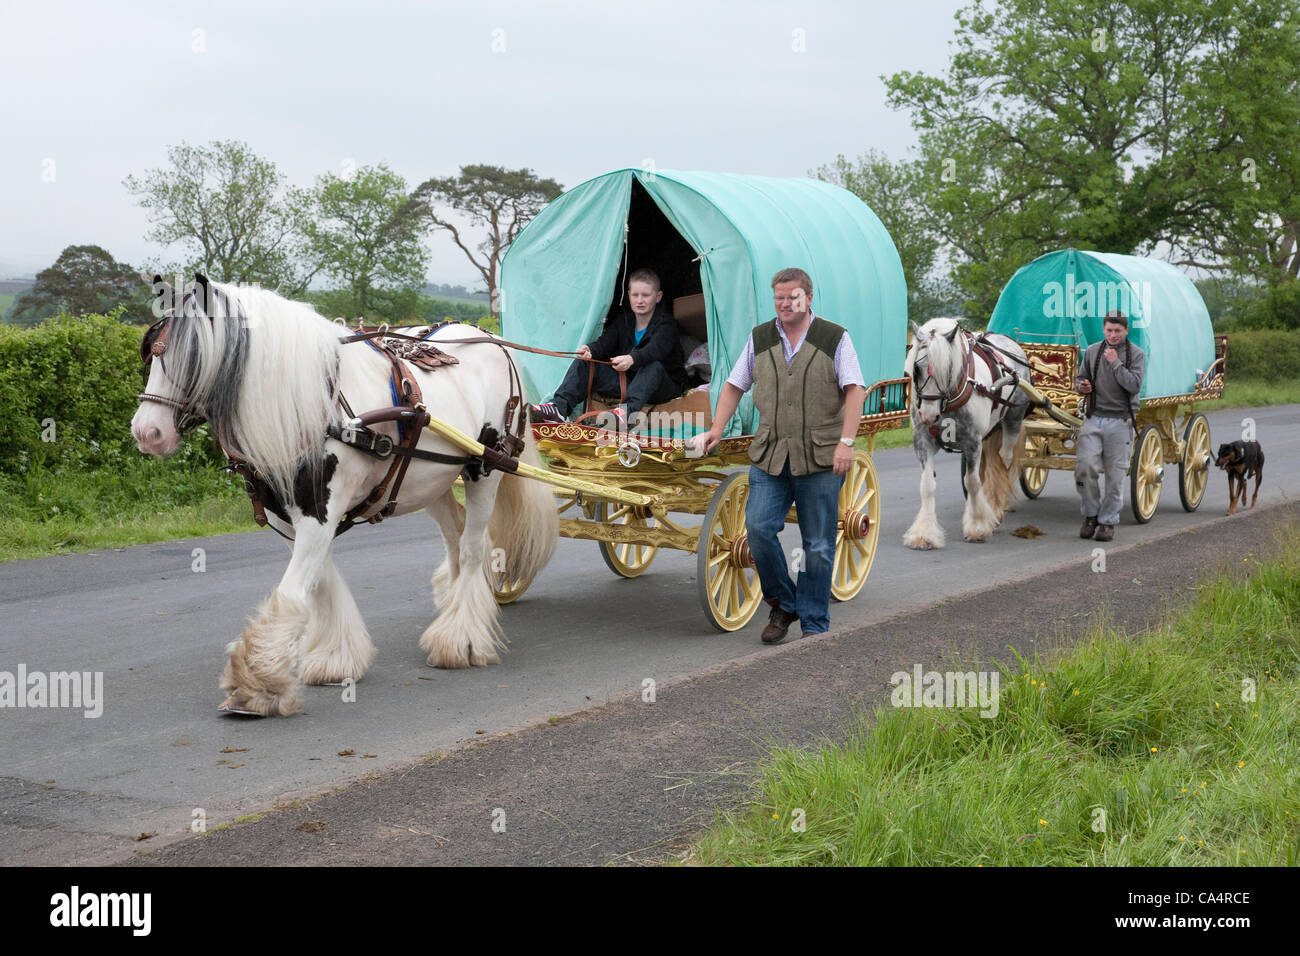 Thursday 7th June 2012 at Appleby, Cumbria, England, UK. Horse drawn bow-top wagons arrive from all over the UK on the first day of the Appleby Fair, the biggest annual gathering of Gypsies and Travellers in Europe.  The fair takes place 7th-13th June 2012. Stock Photo